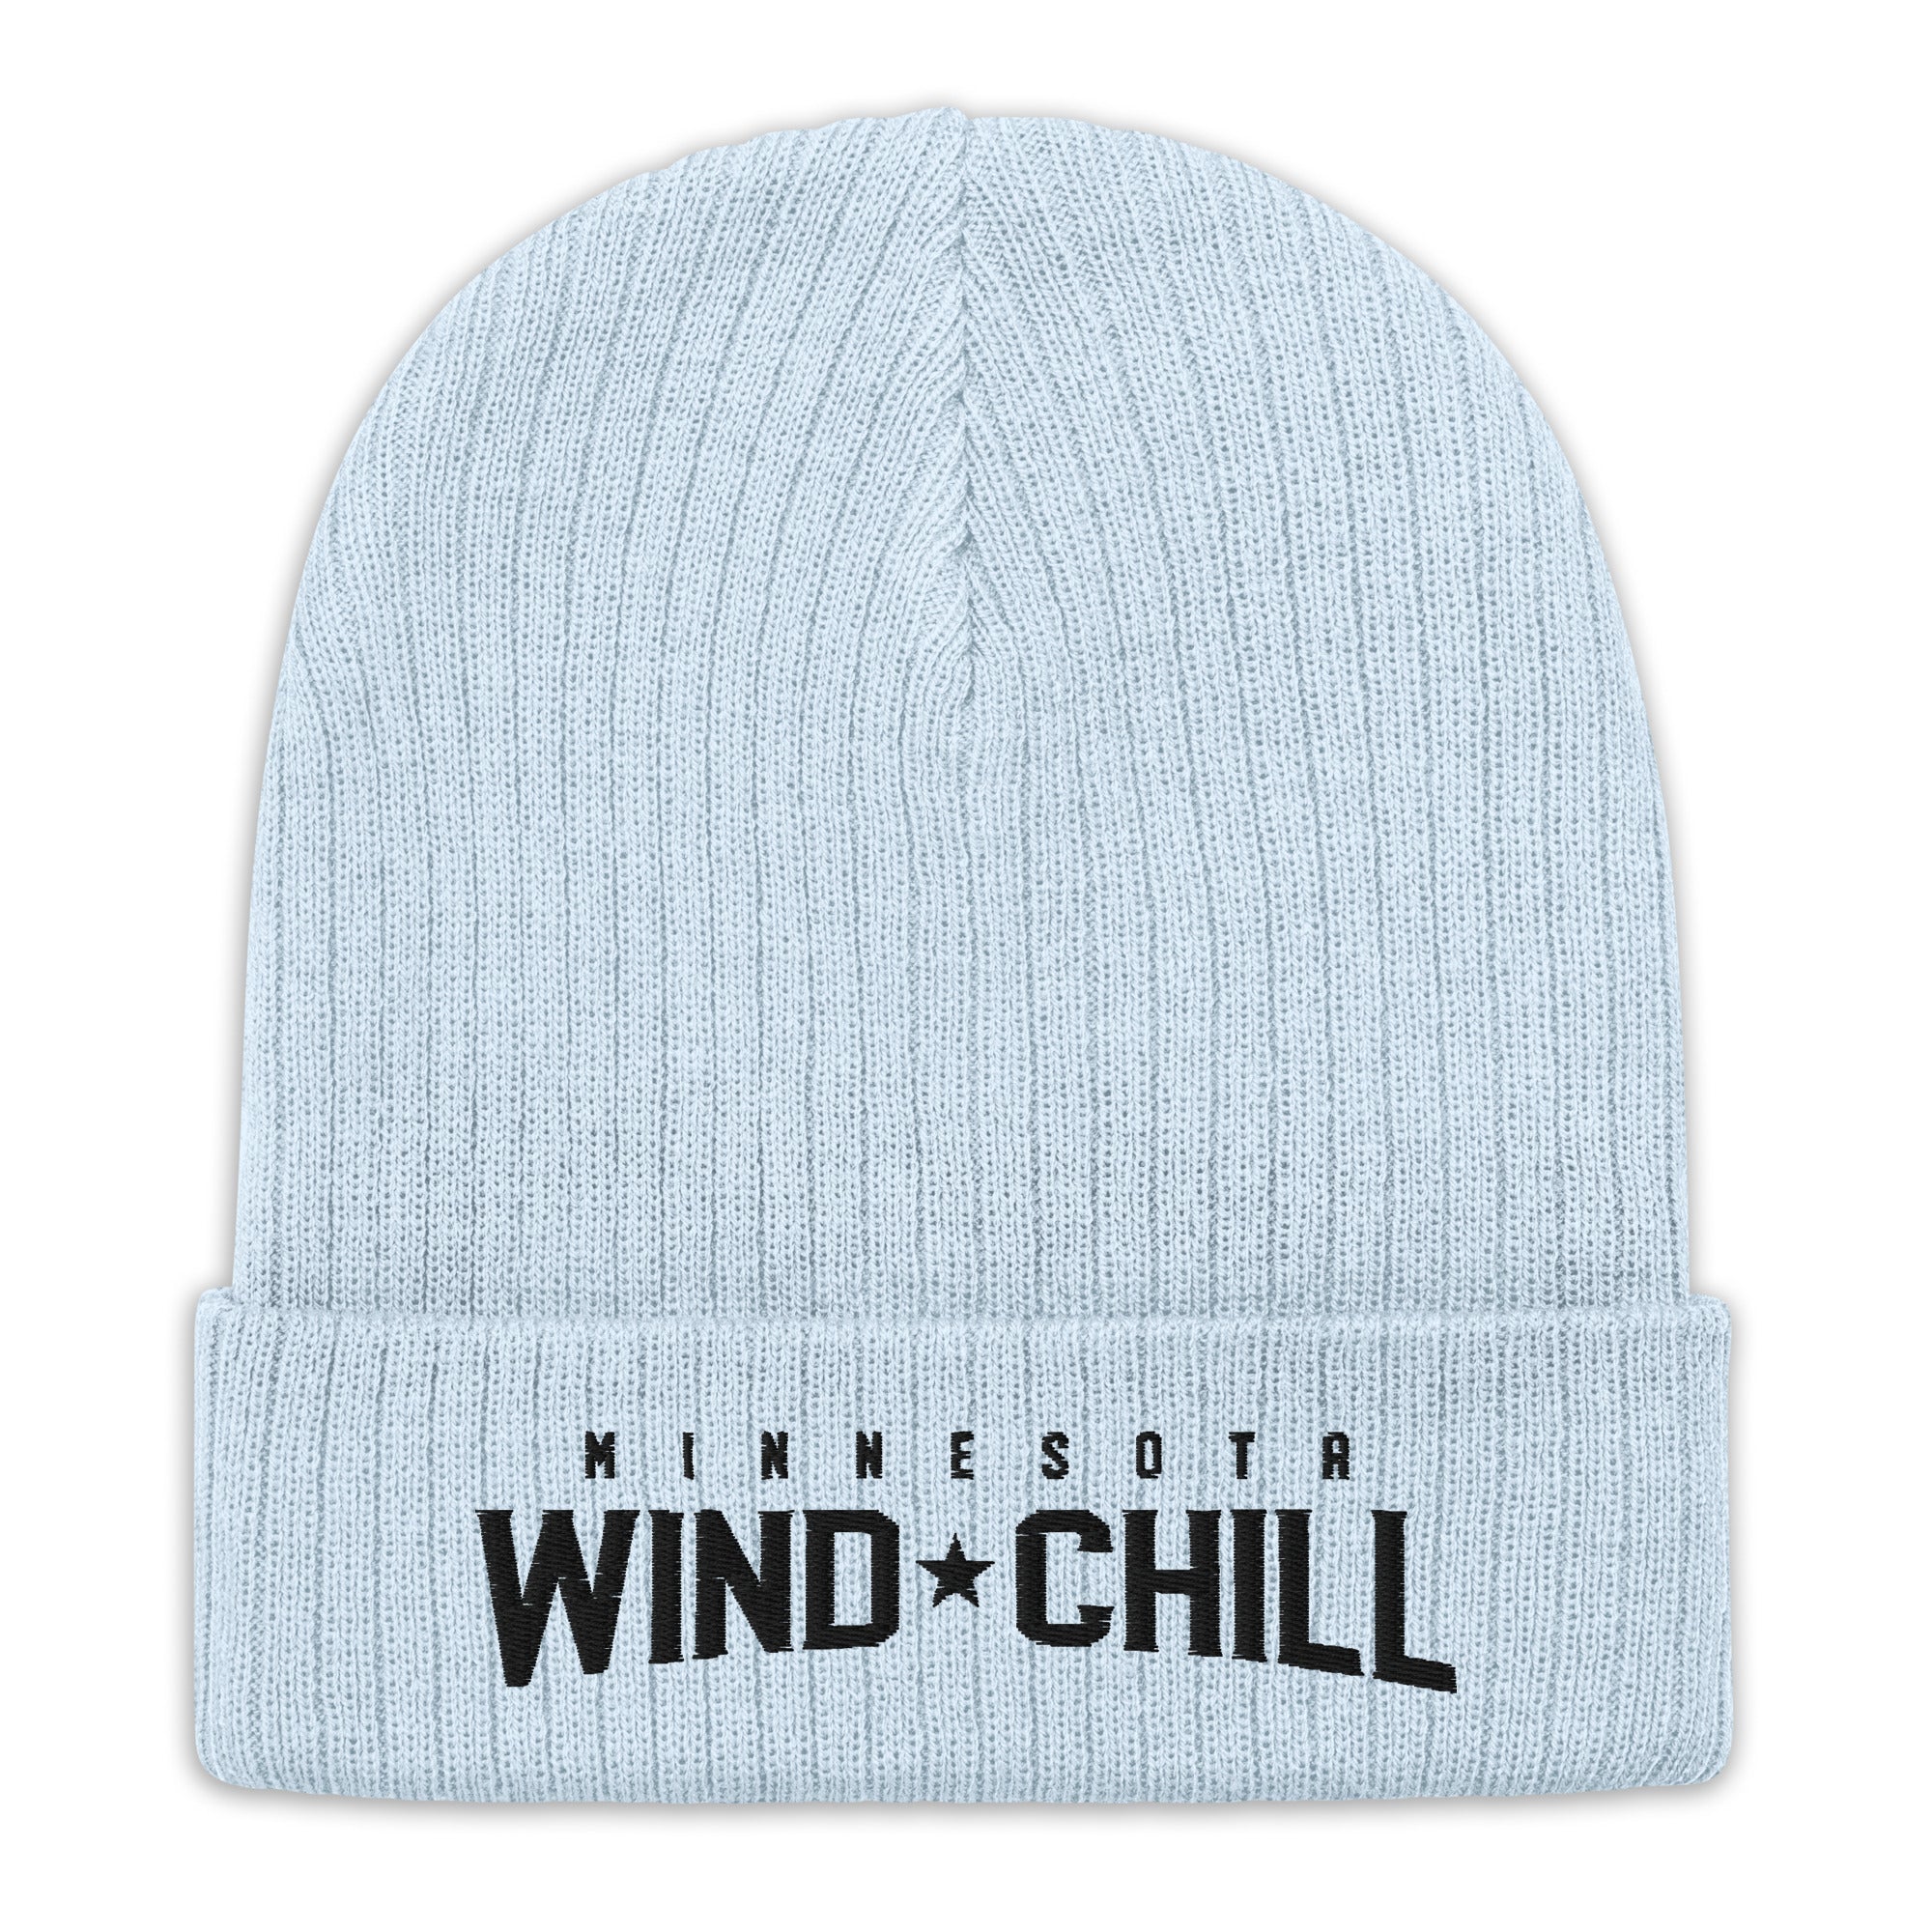 Wind Chill Wordmark Ribbed Knit Beanie